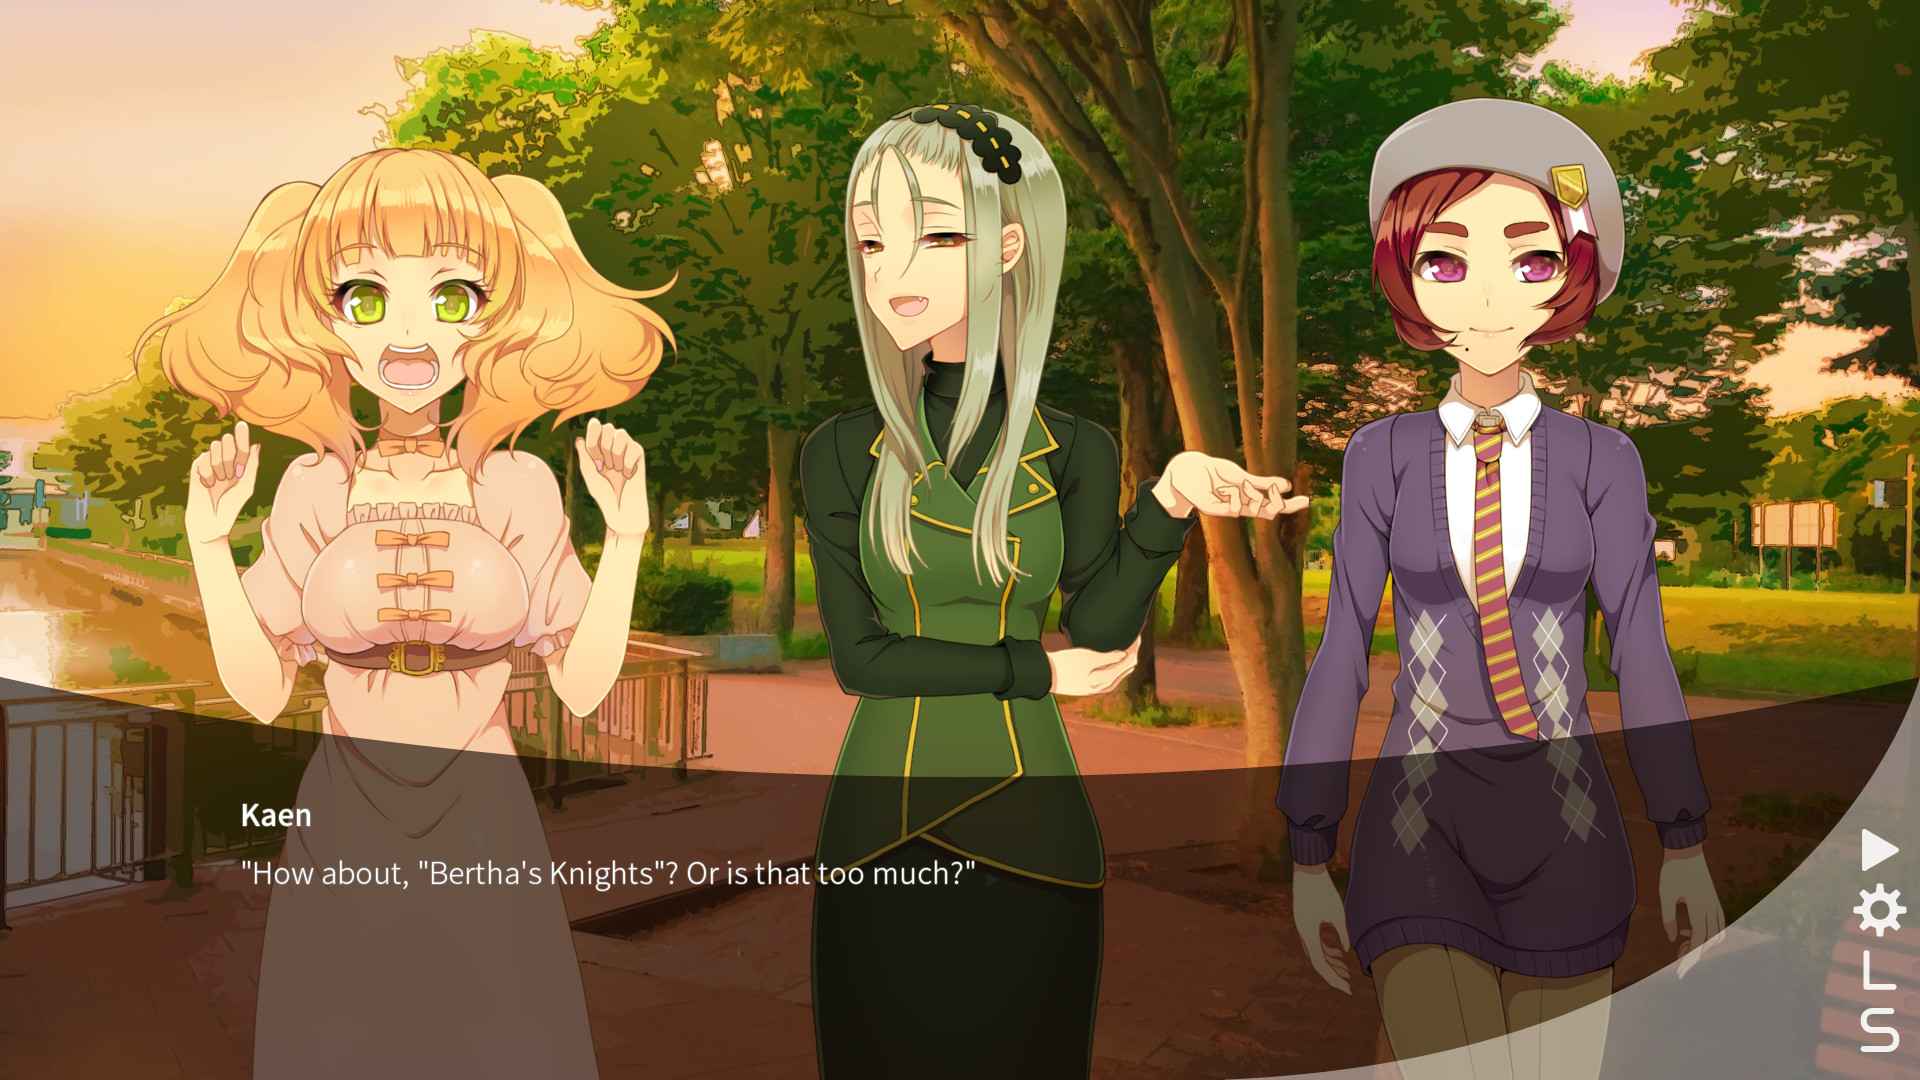 Campus Notes - forget me not. screenshot